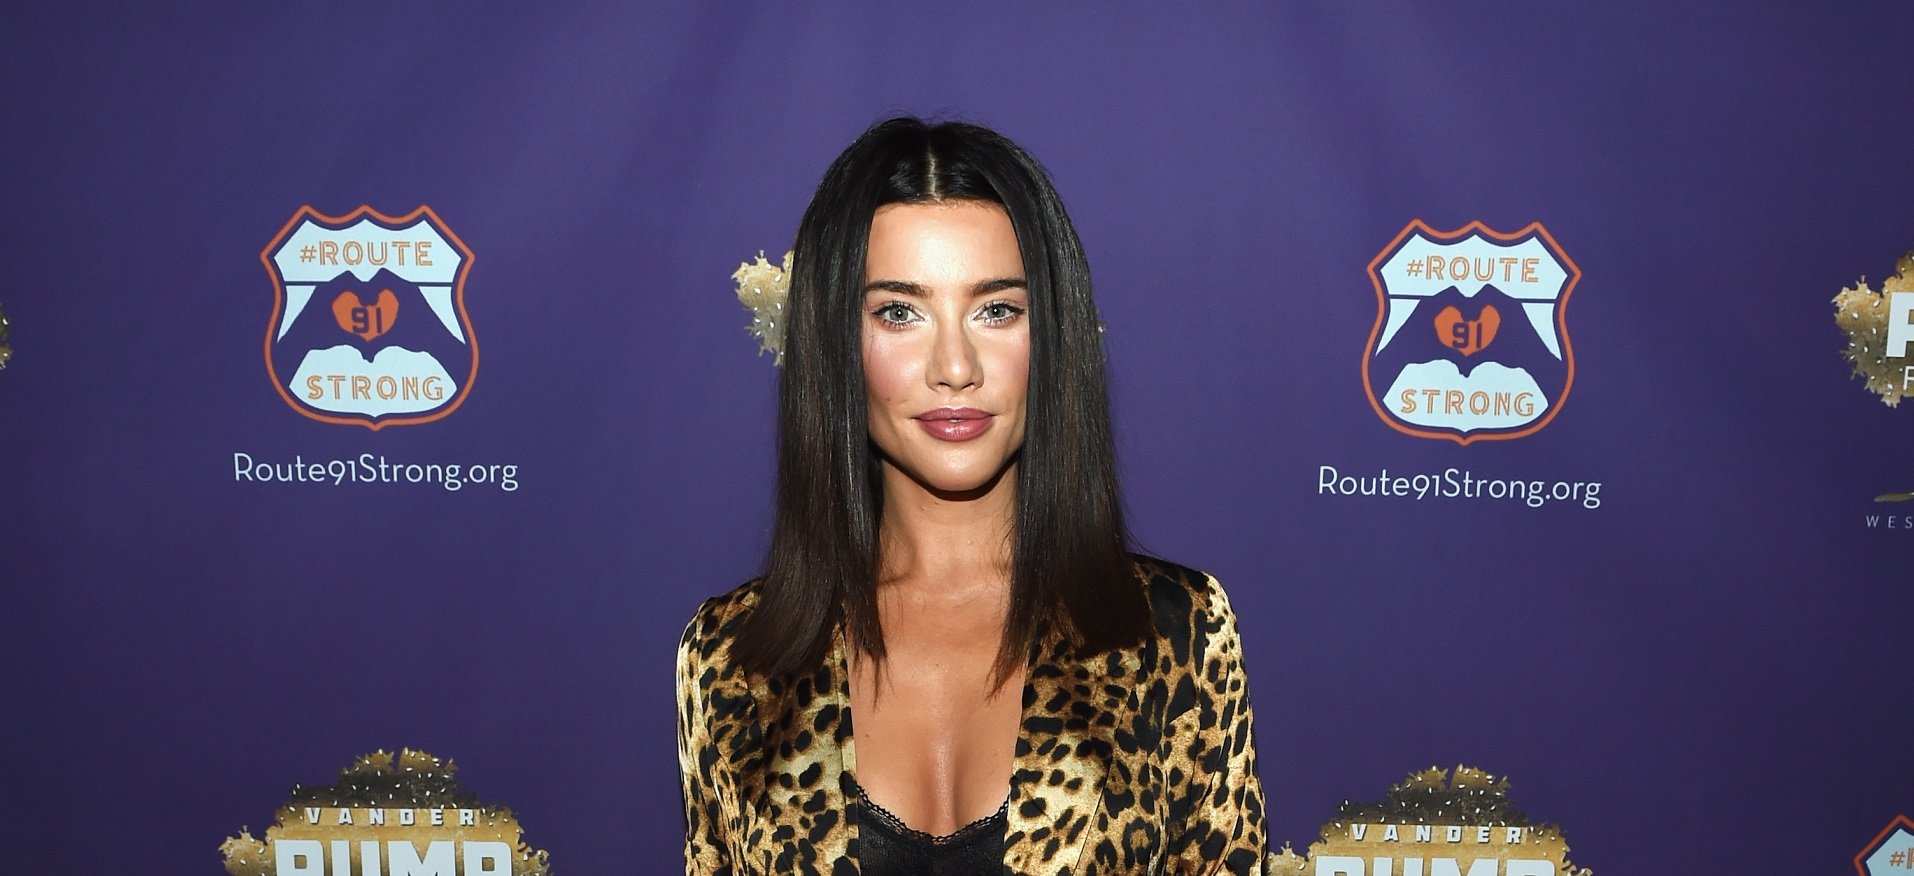 The Bold and the Beautiful spoilers for this week feature Steffy, played by Jacqueline MacInnes Wood, pictured here